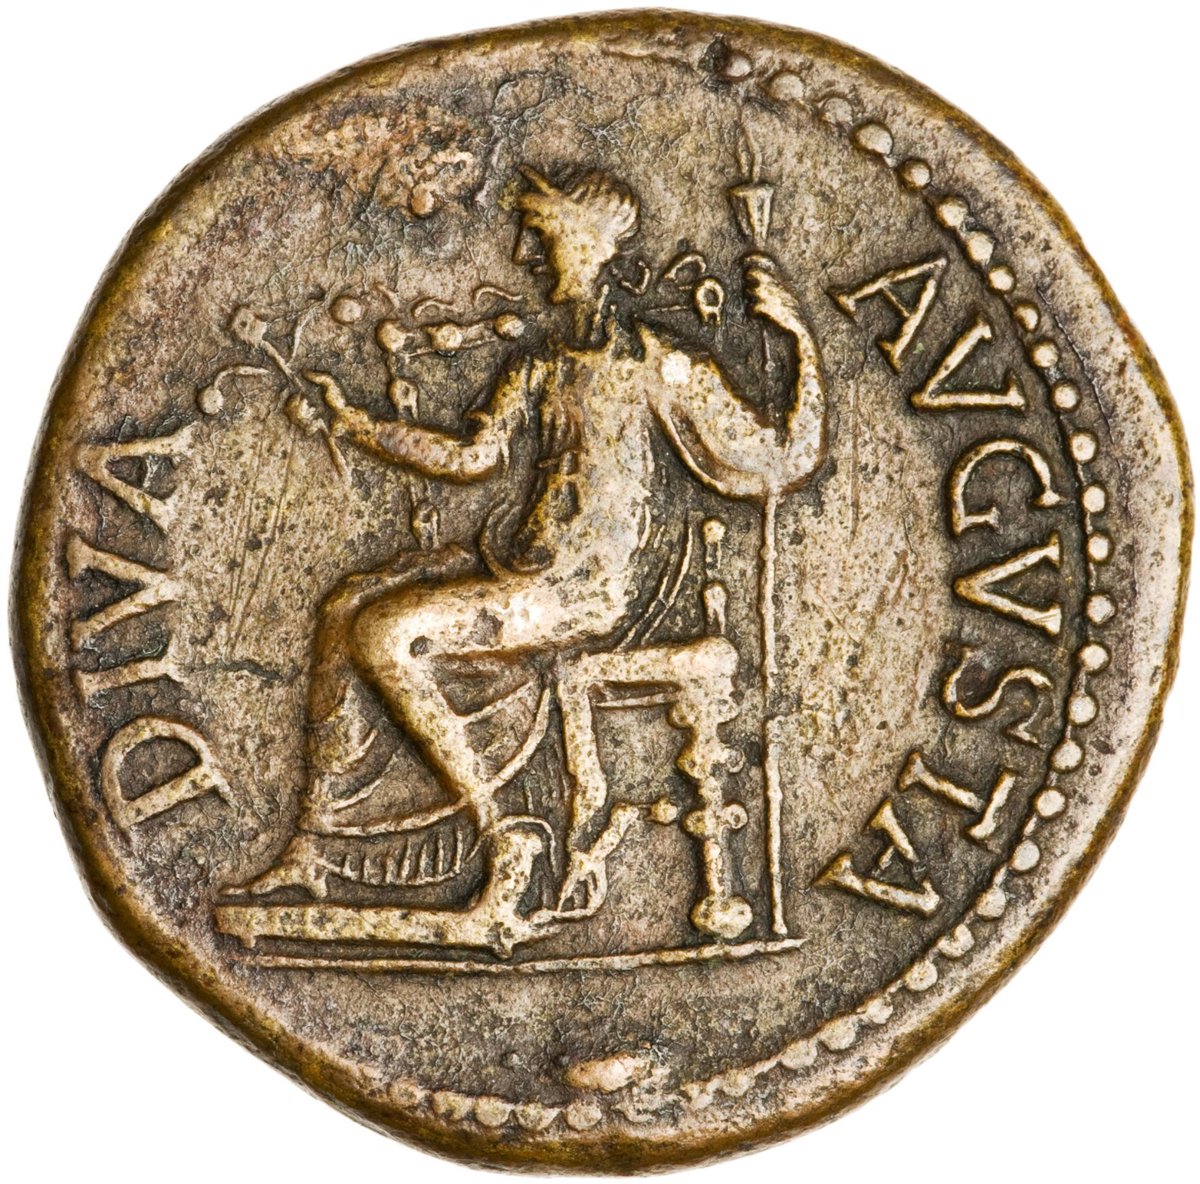 Ancient Coin of the Day: A brass dupondius of Claudius, ca. AD 41-50, commemorating the deification of Livia, the wife of Augustus and grandmother of Claudius.  #ACOTD  #Livia Image: RIC Claudius 101; ANS 1978.27.5. Link -  http://numismatics.org/collection/1978.27.5